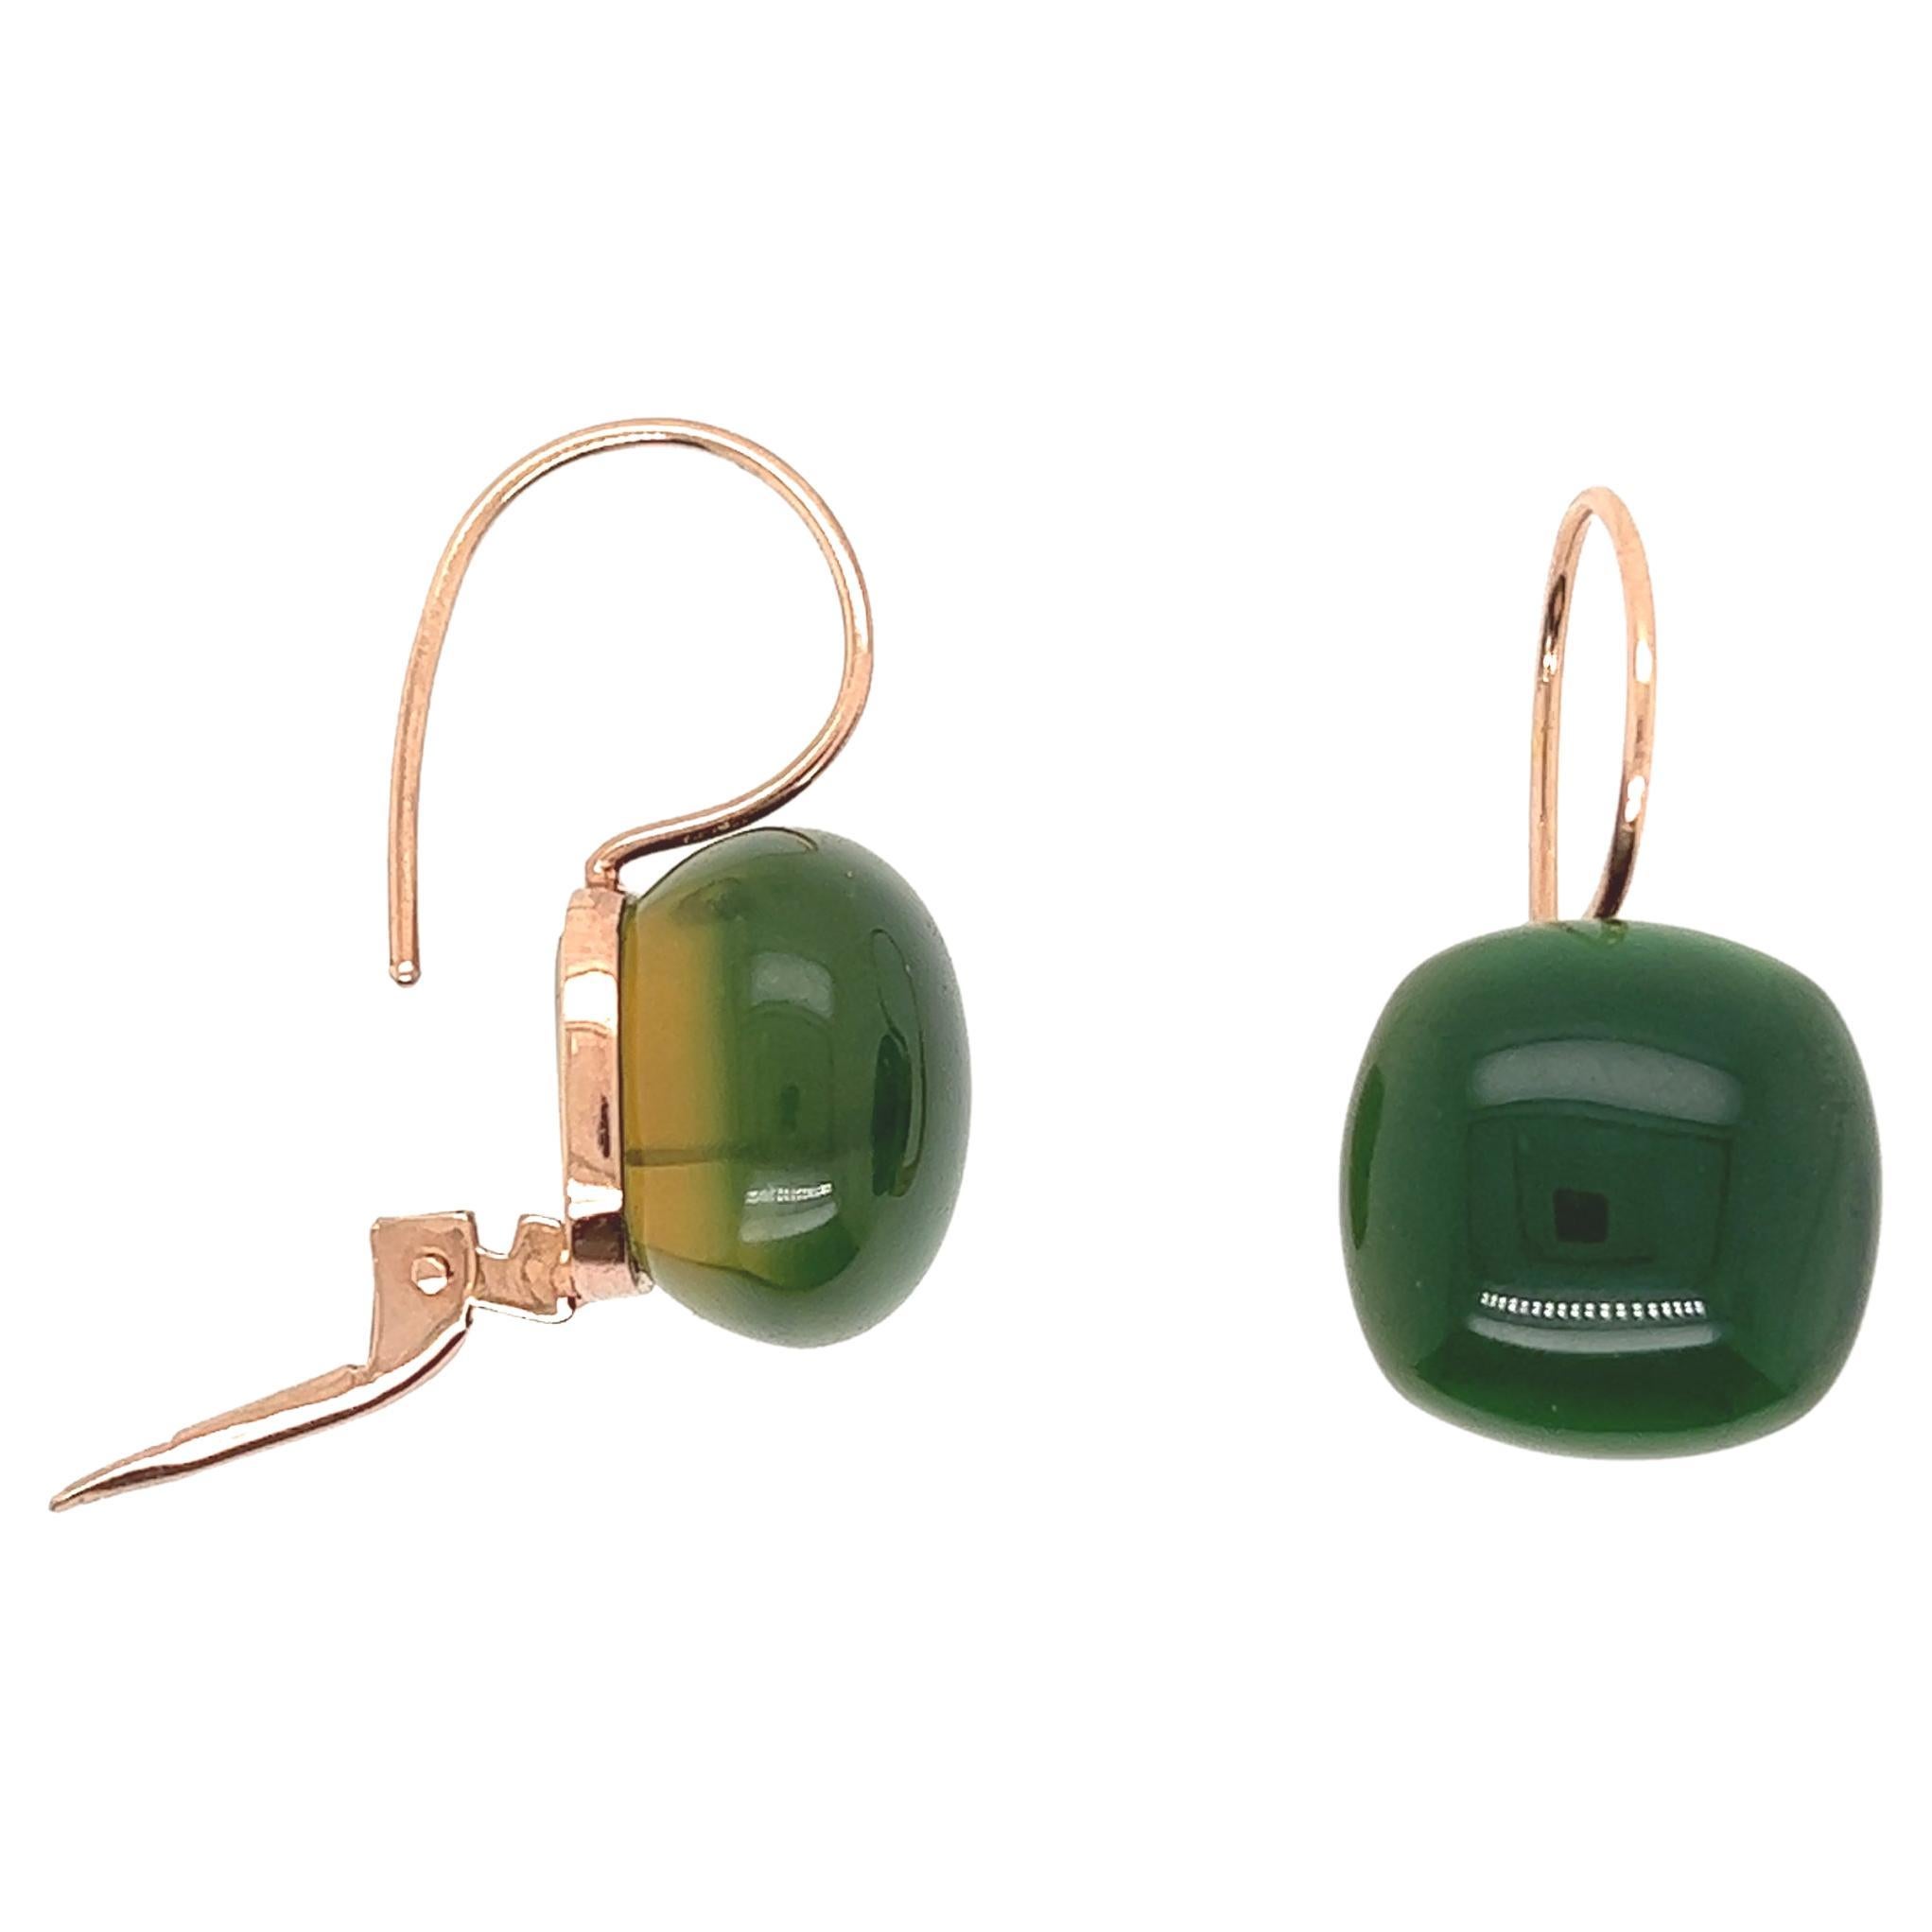 Rose Gold Earring with Green Quartz
French Collection by Mesure et Art du Temps

Pink gold earring surmounted by a green quartz which measures 1.3 cm in width and 1.3 cm in length. The gold weight of the earring is 4.3 grams and the gold weight is